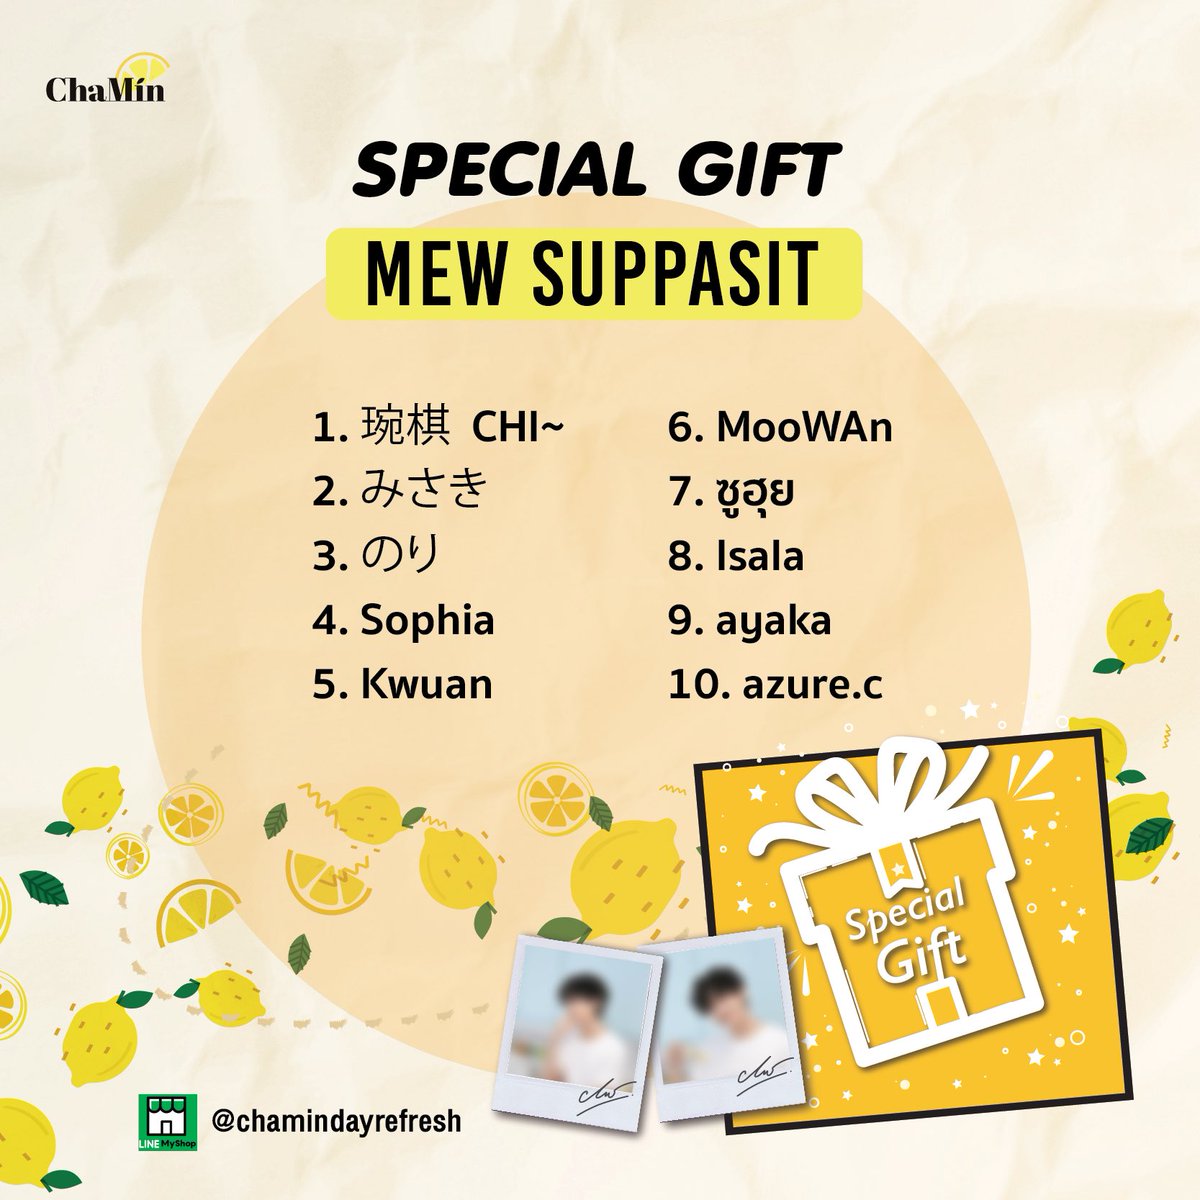 Congratulations for Lucky draw fan #Chaminชาของมิว #mewsuppasit